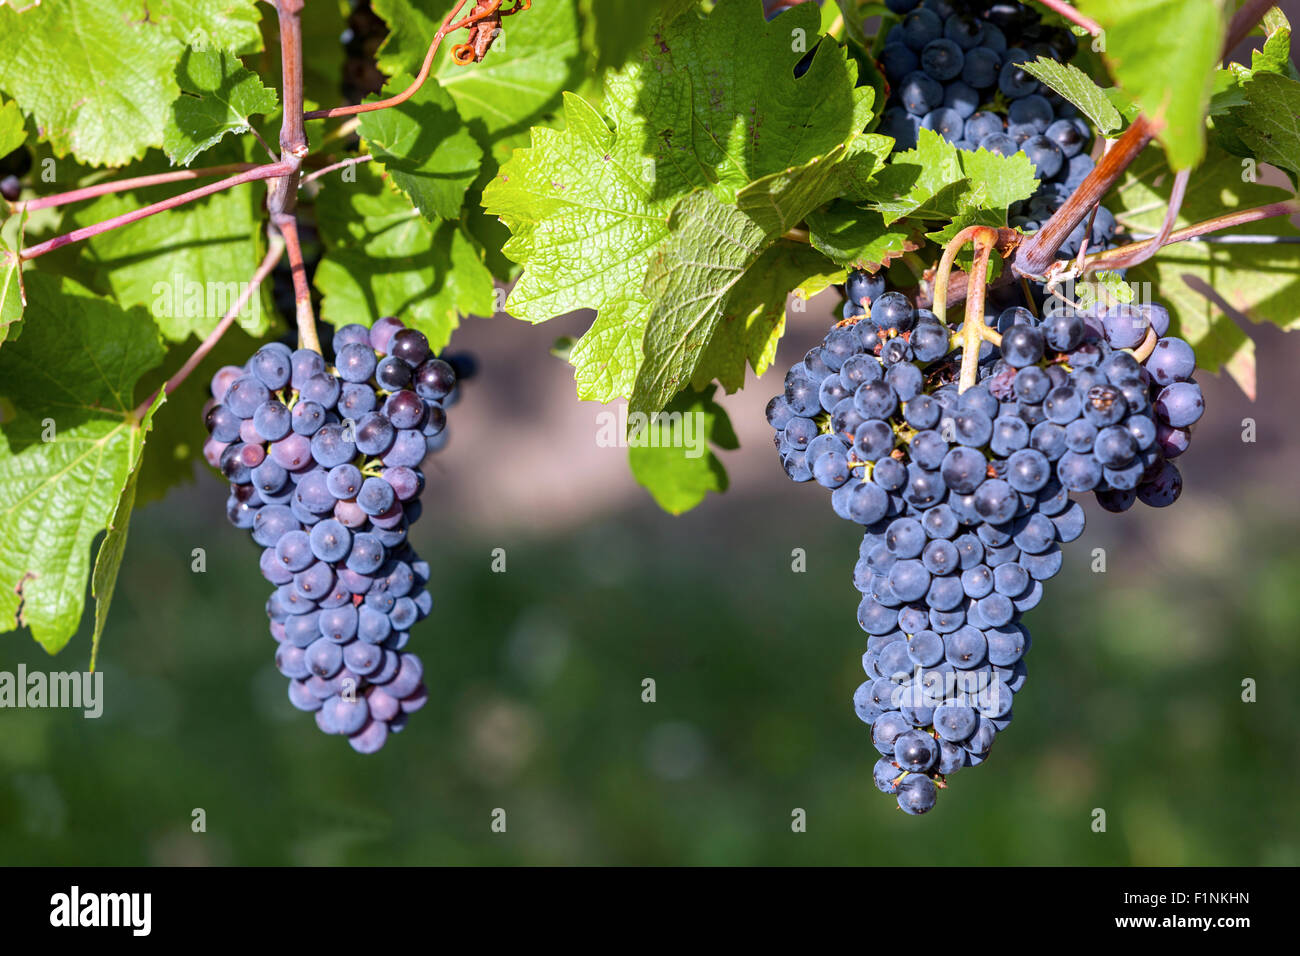 Wine region Valtice, a bunch of grapes on vine, South Moravia, Czech Republic, Europe Stock Photo